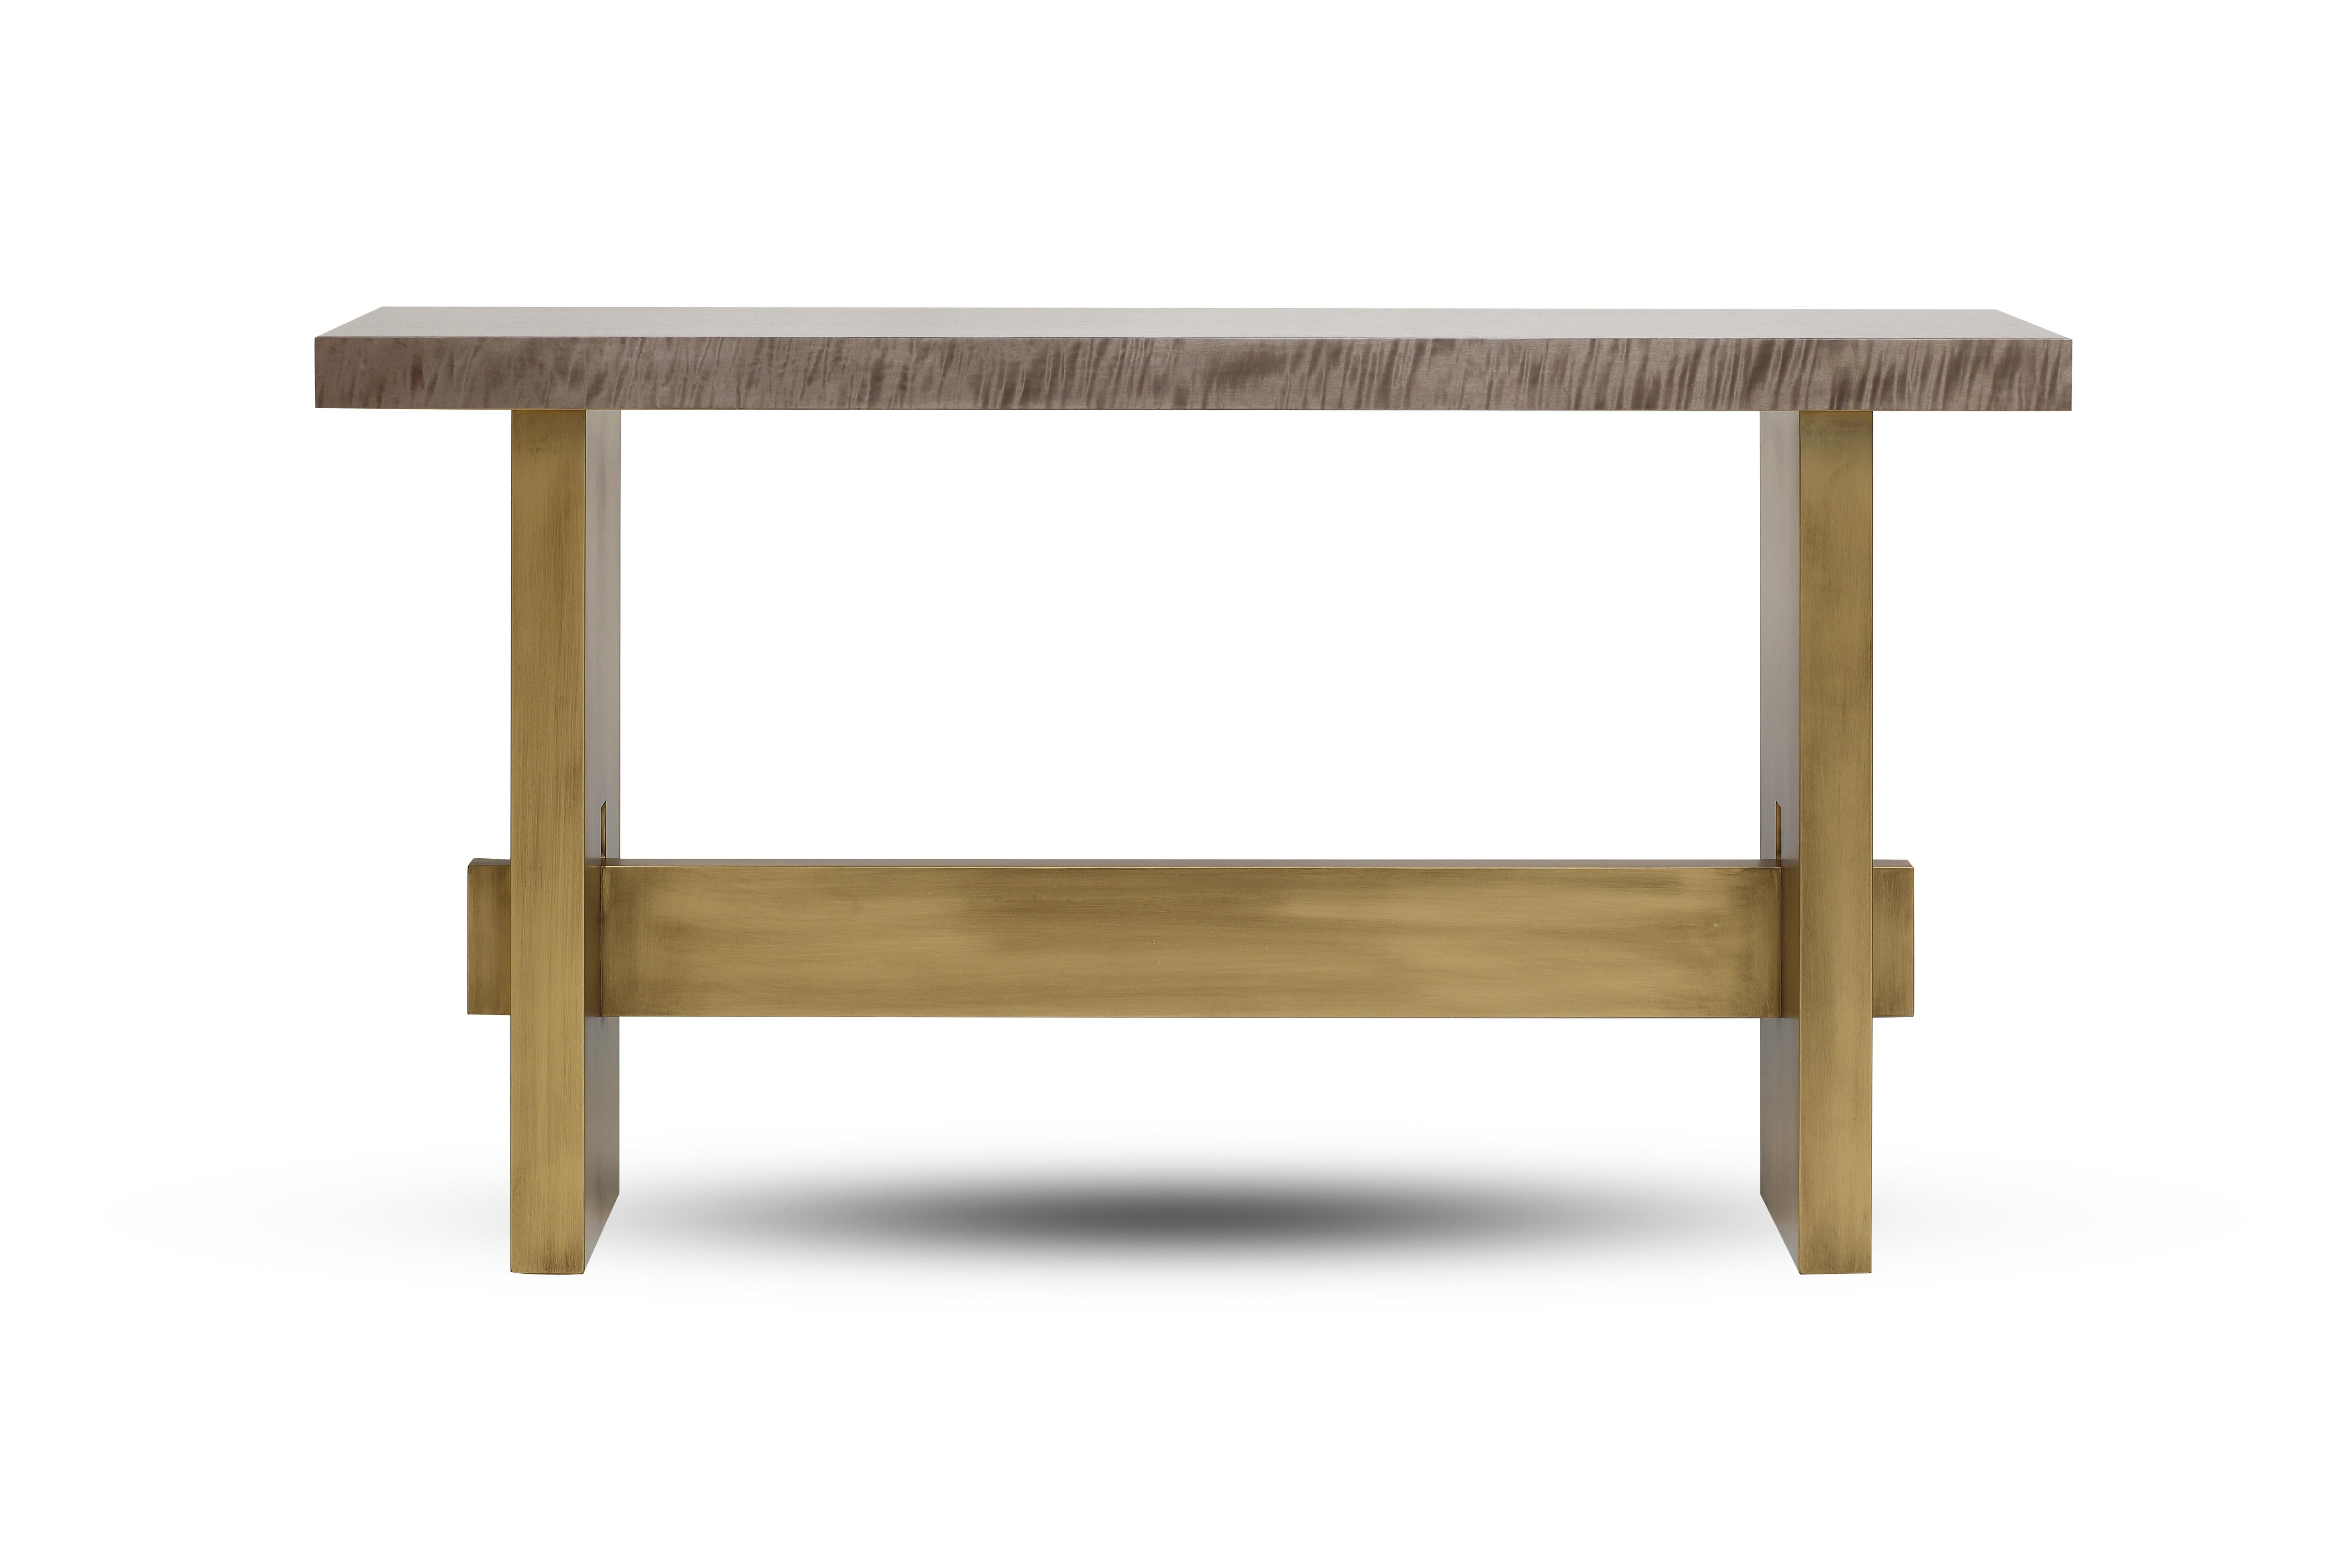 Geometry Console Table, in Bronze and Figured Sycamore, Handcrafted by Duistt

The geometry console uses the traditional craft technique in a contemporary design. The top is made using light grey figured sycamore, the base and cross bar in a bronze